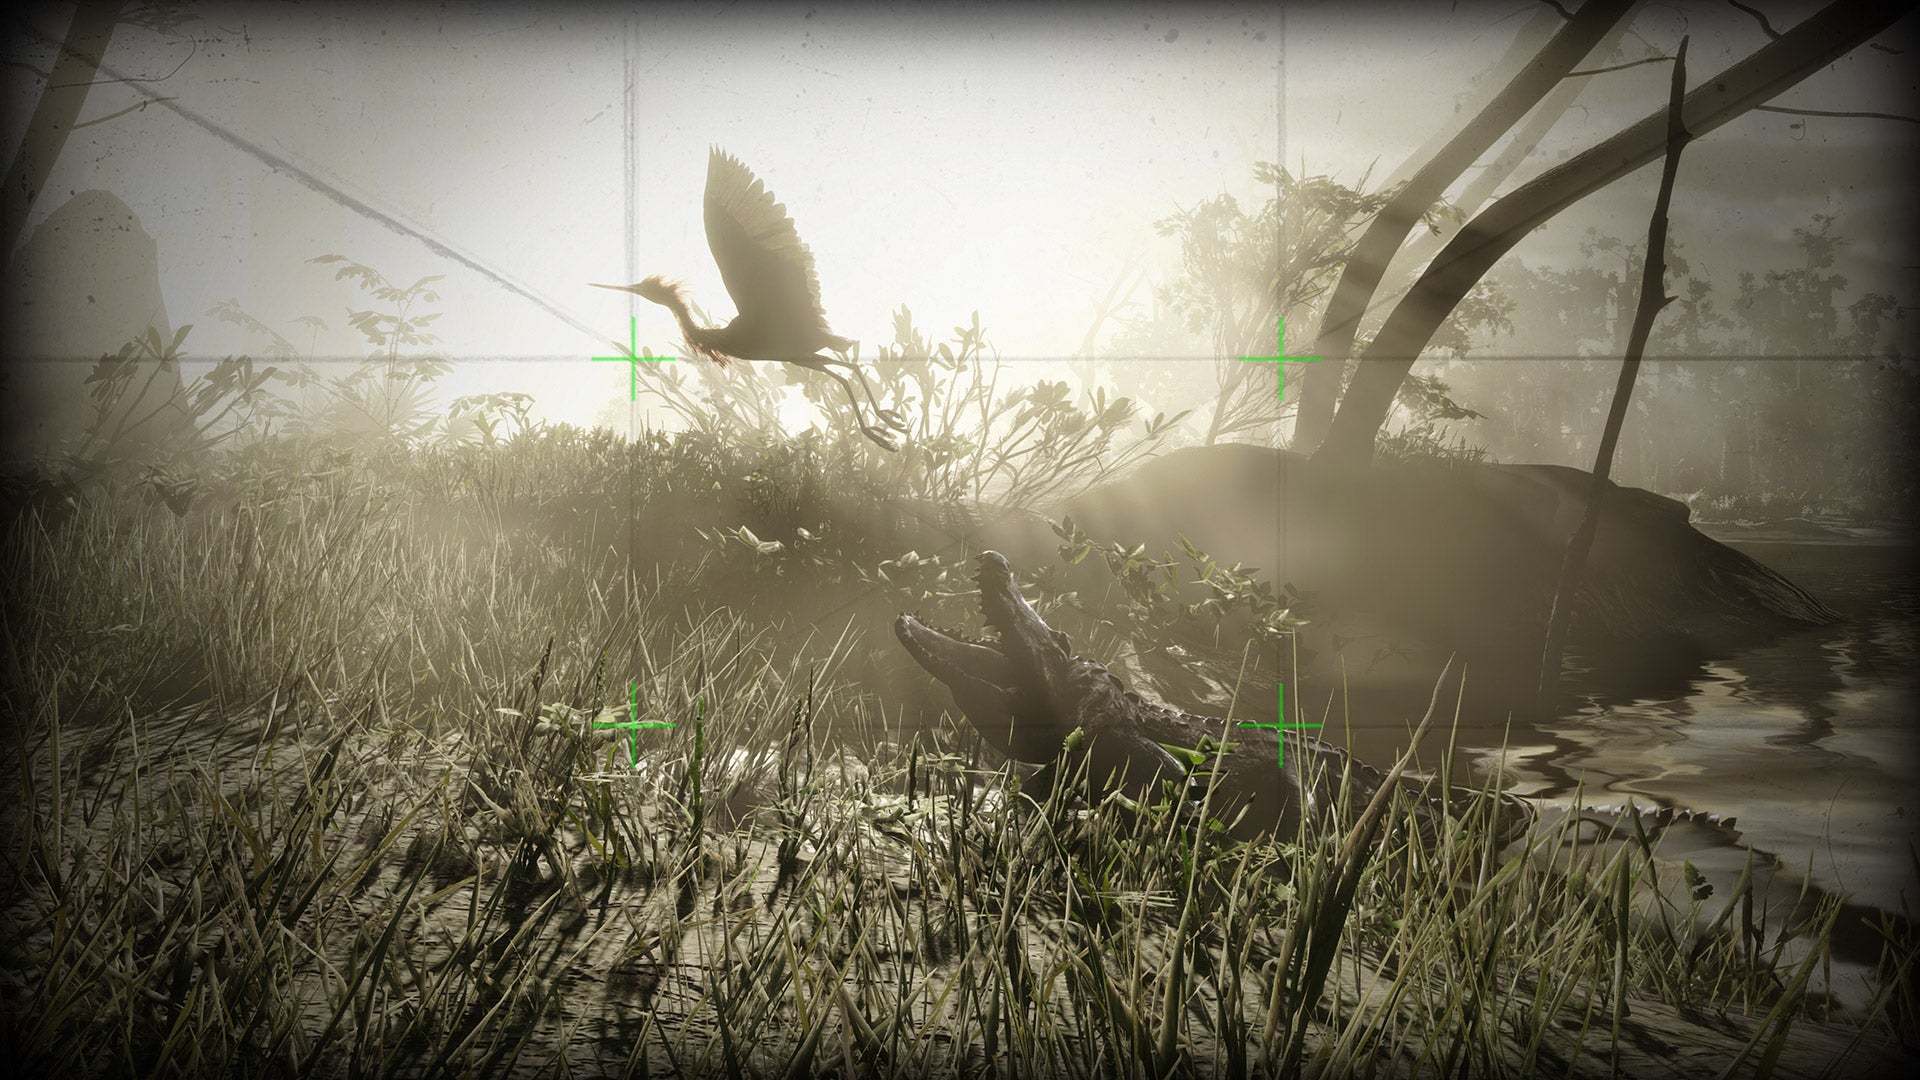 Red Dead Online - A camera viewfinder aims at an American Alligator snapping at a bird.